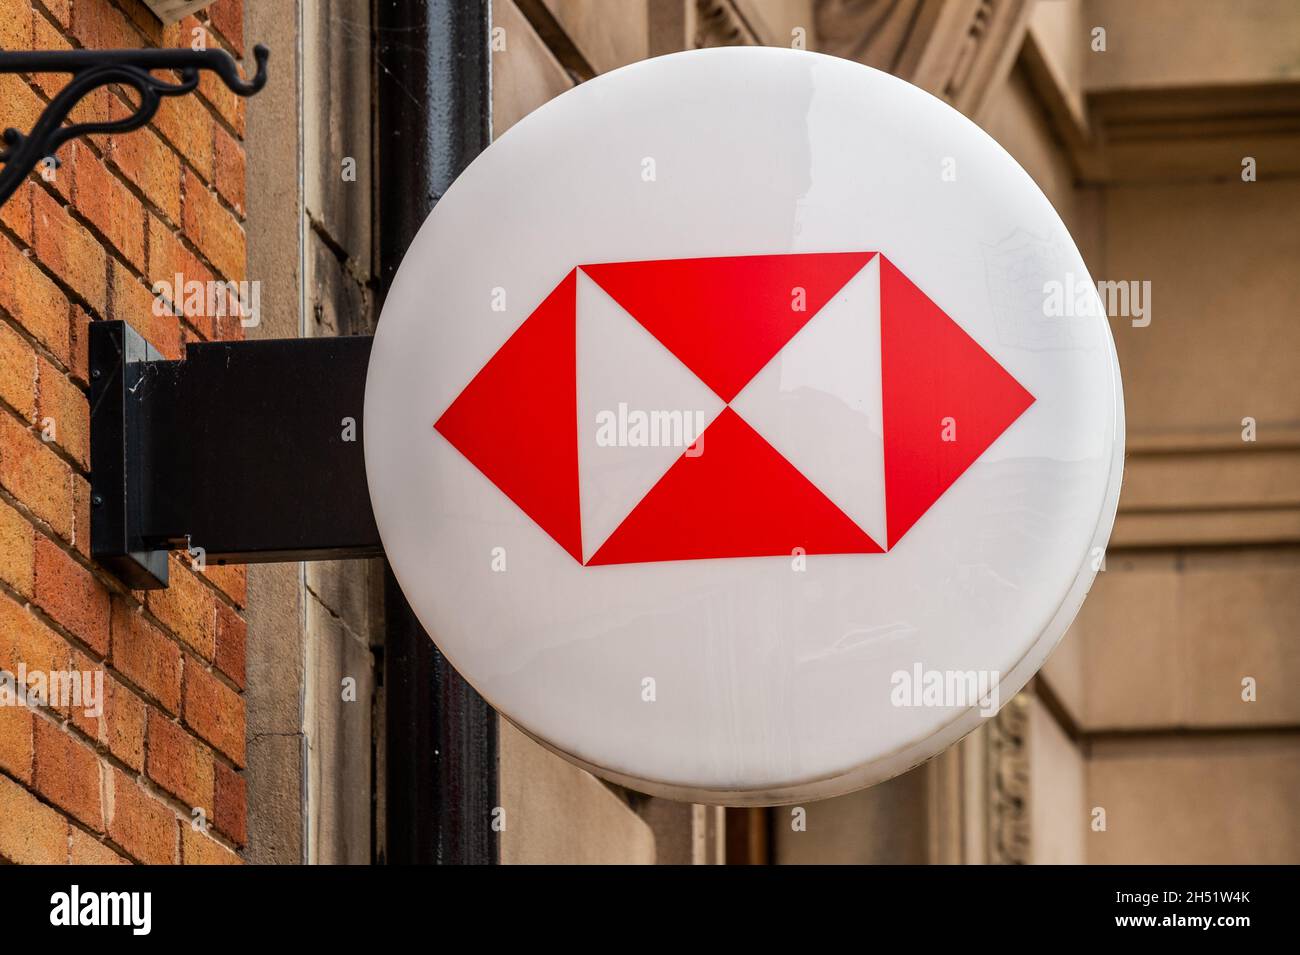 HSBC UK bank logo on the exterior of its branch in High Street, Coventry, West Midlands, UK. Stock Photo